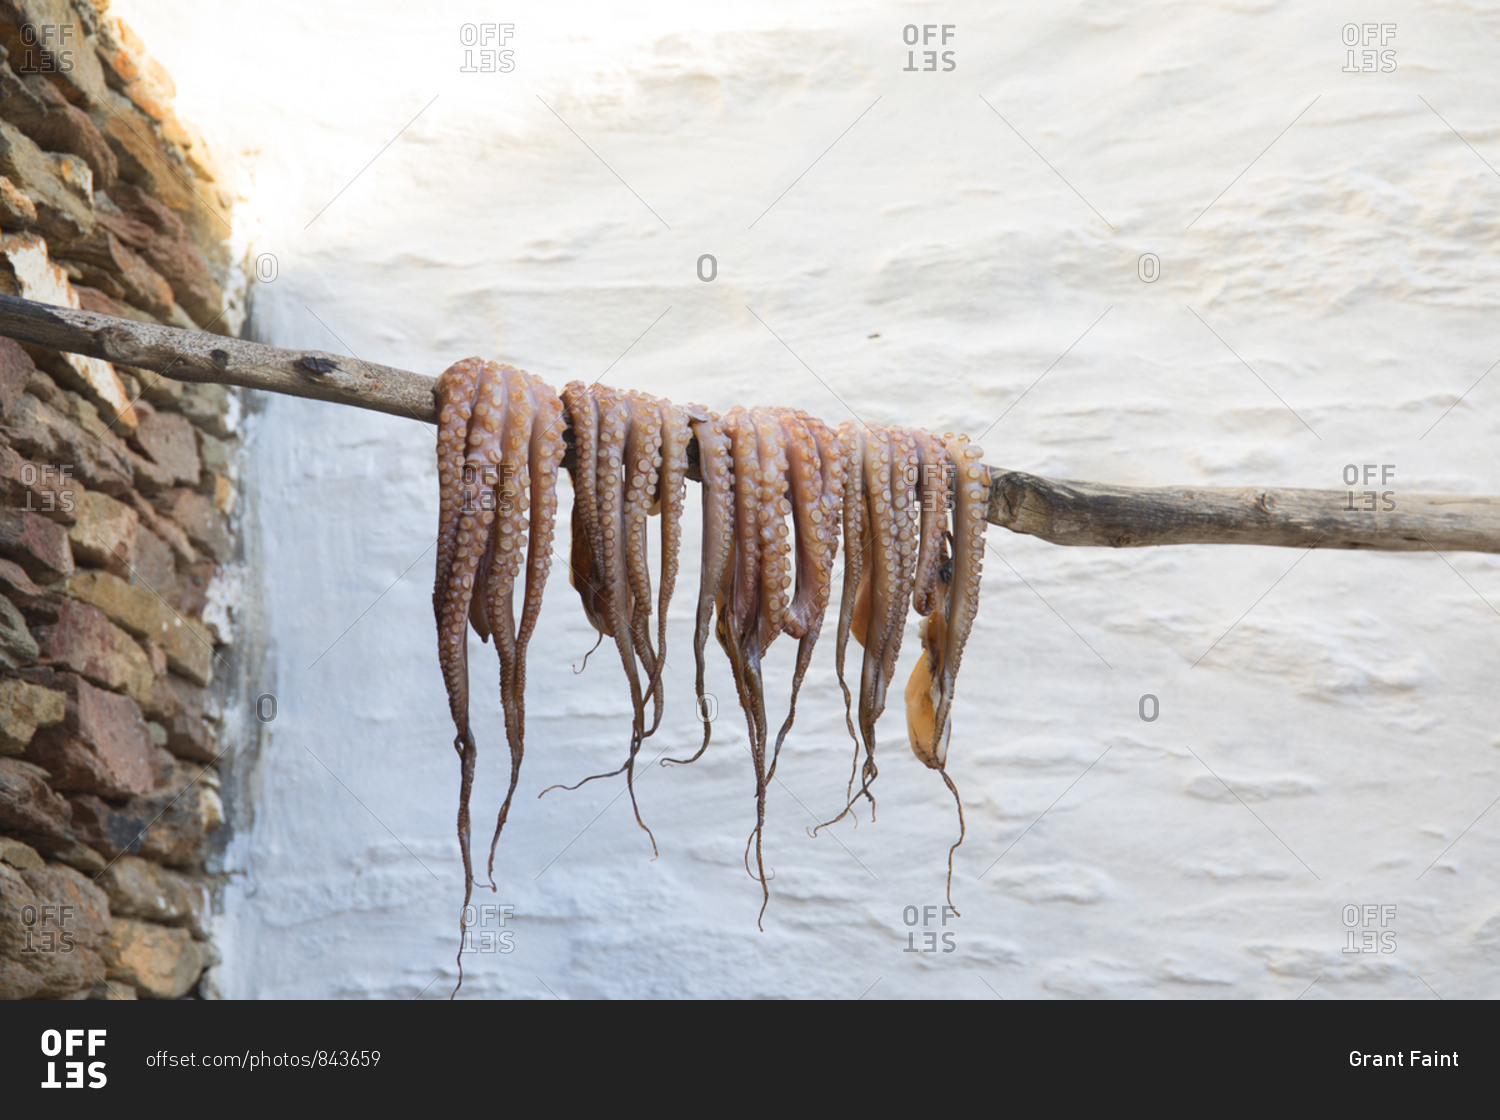 Octopus ready for cooking on barbeque, Folegandros Island, Cyclades, Greece